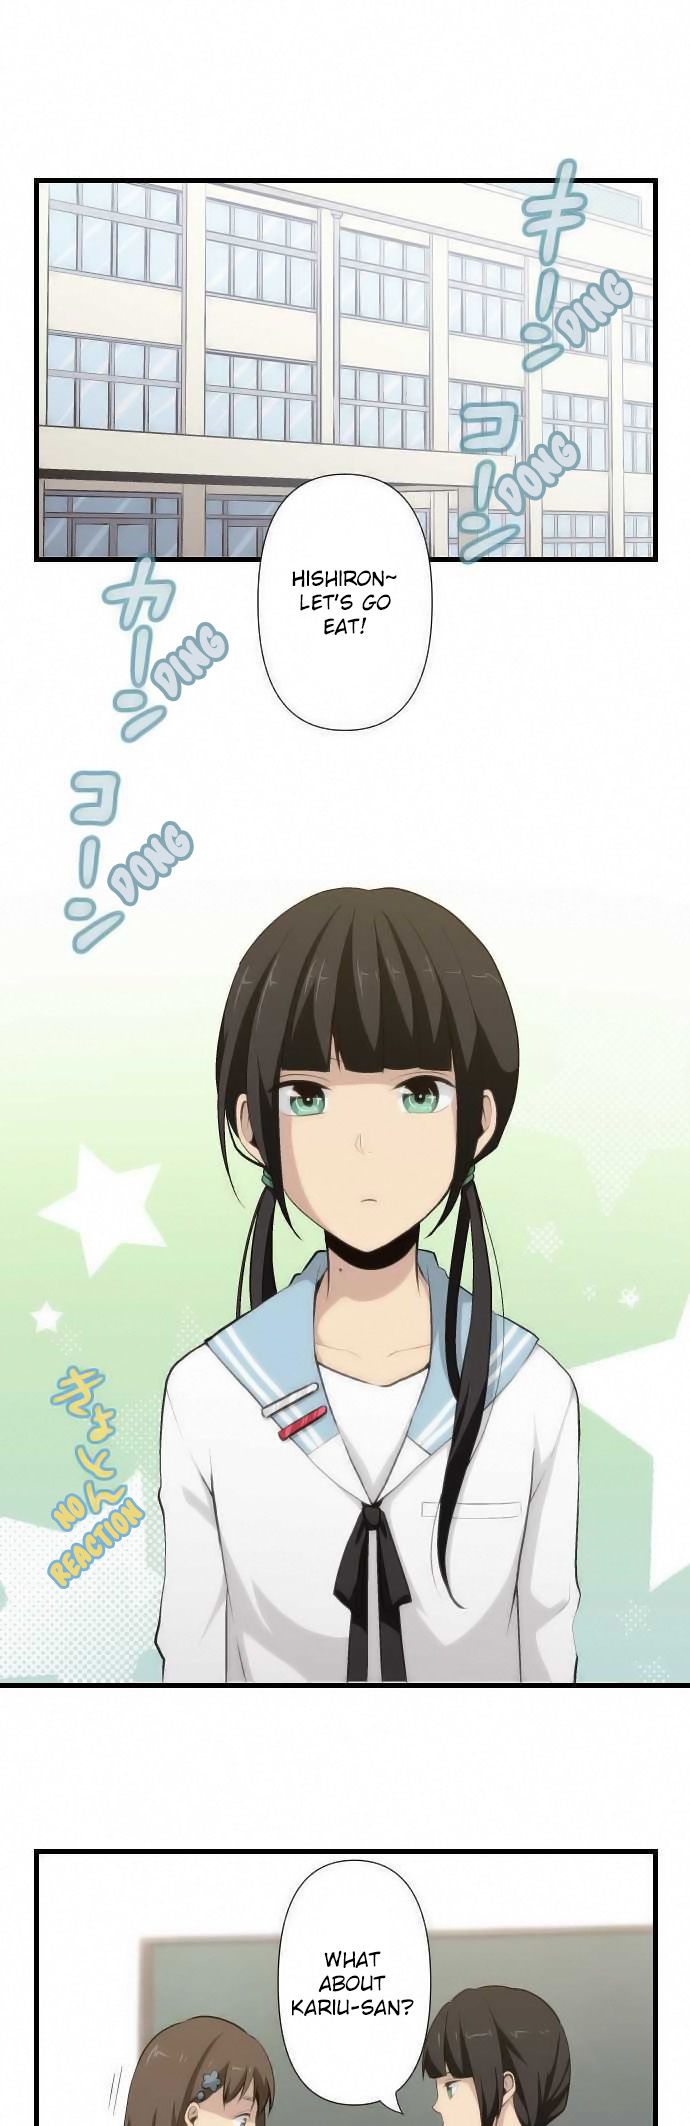 ReLIFE 65